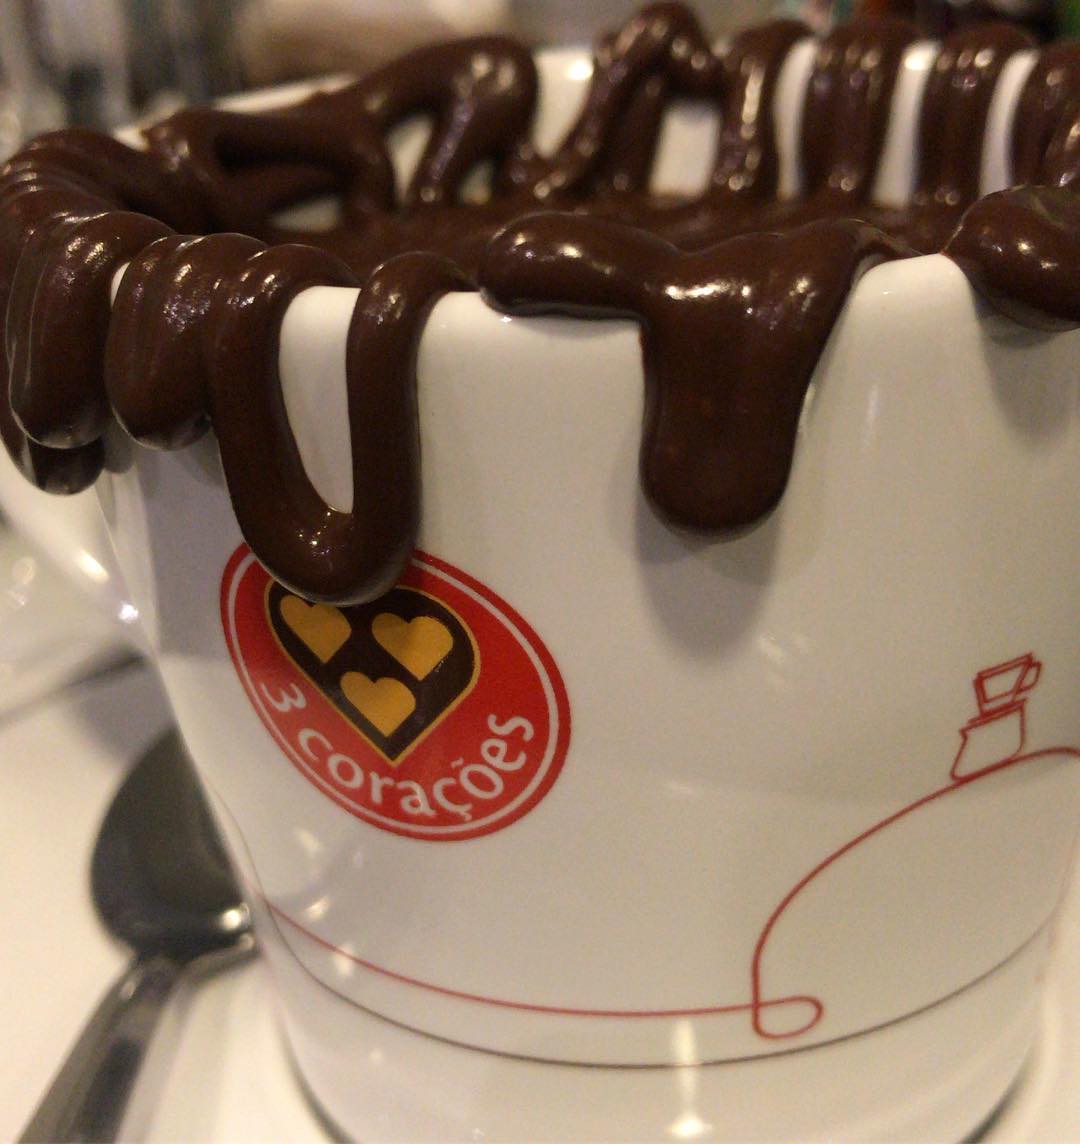 Chocolate quente Low Carb. (Foto: Instagram)